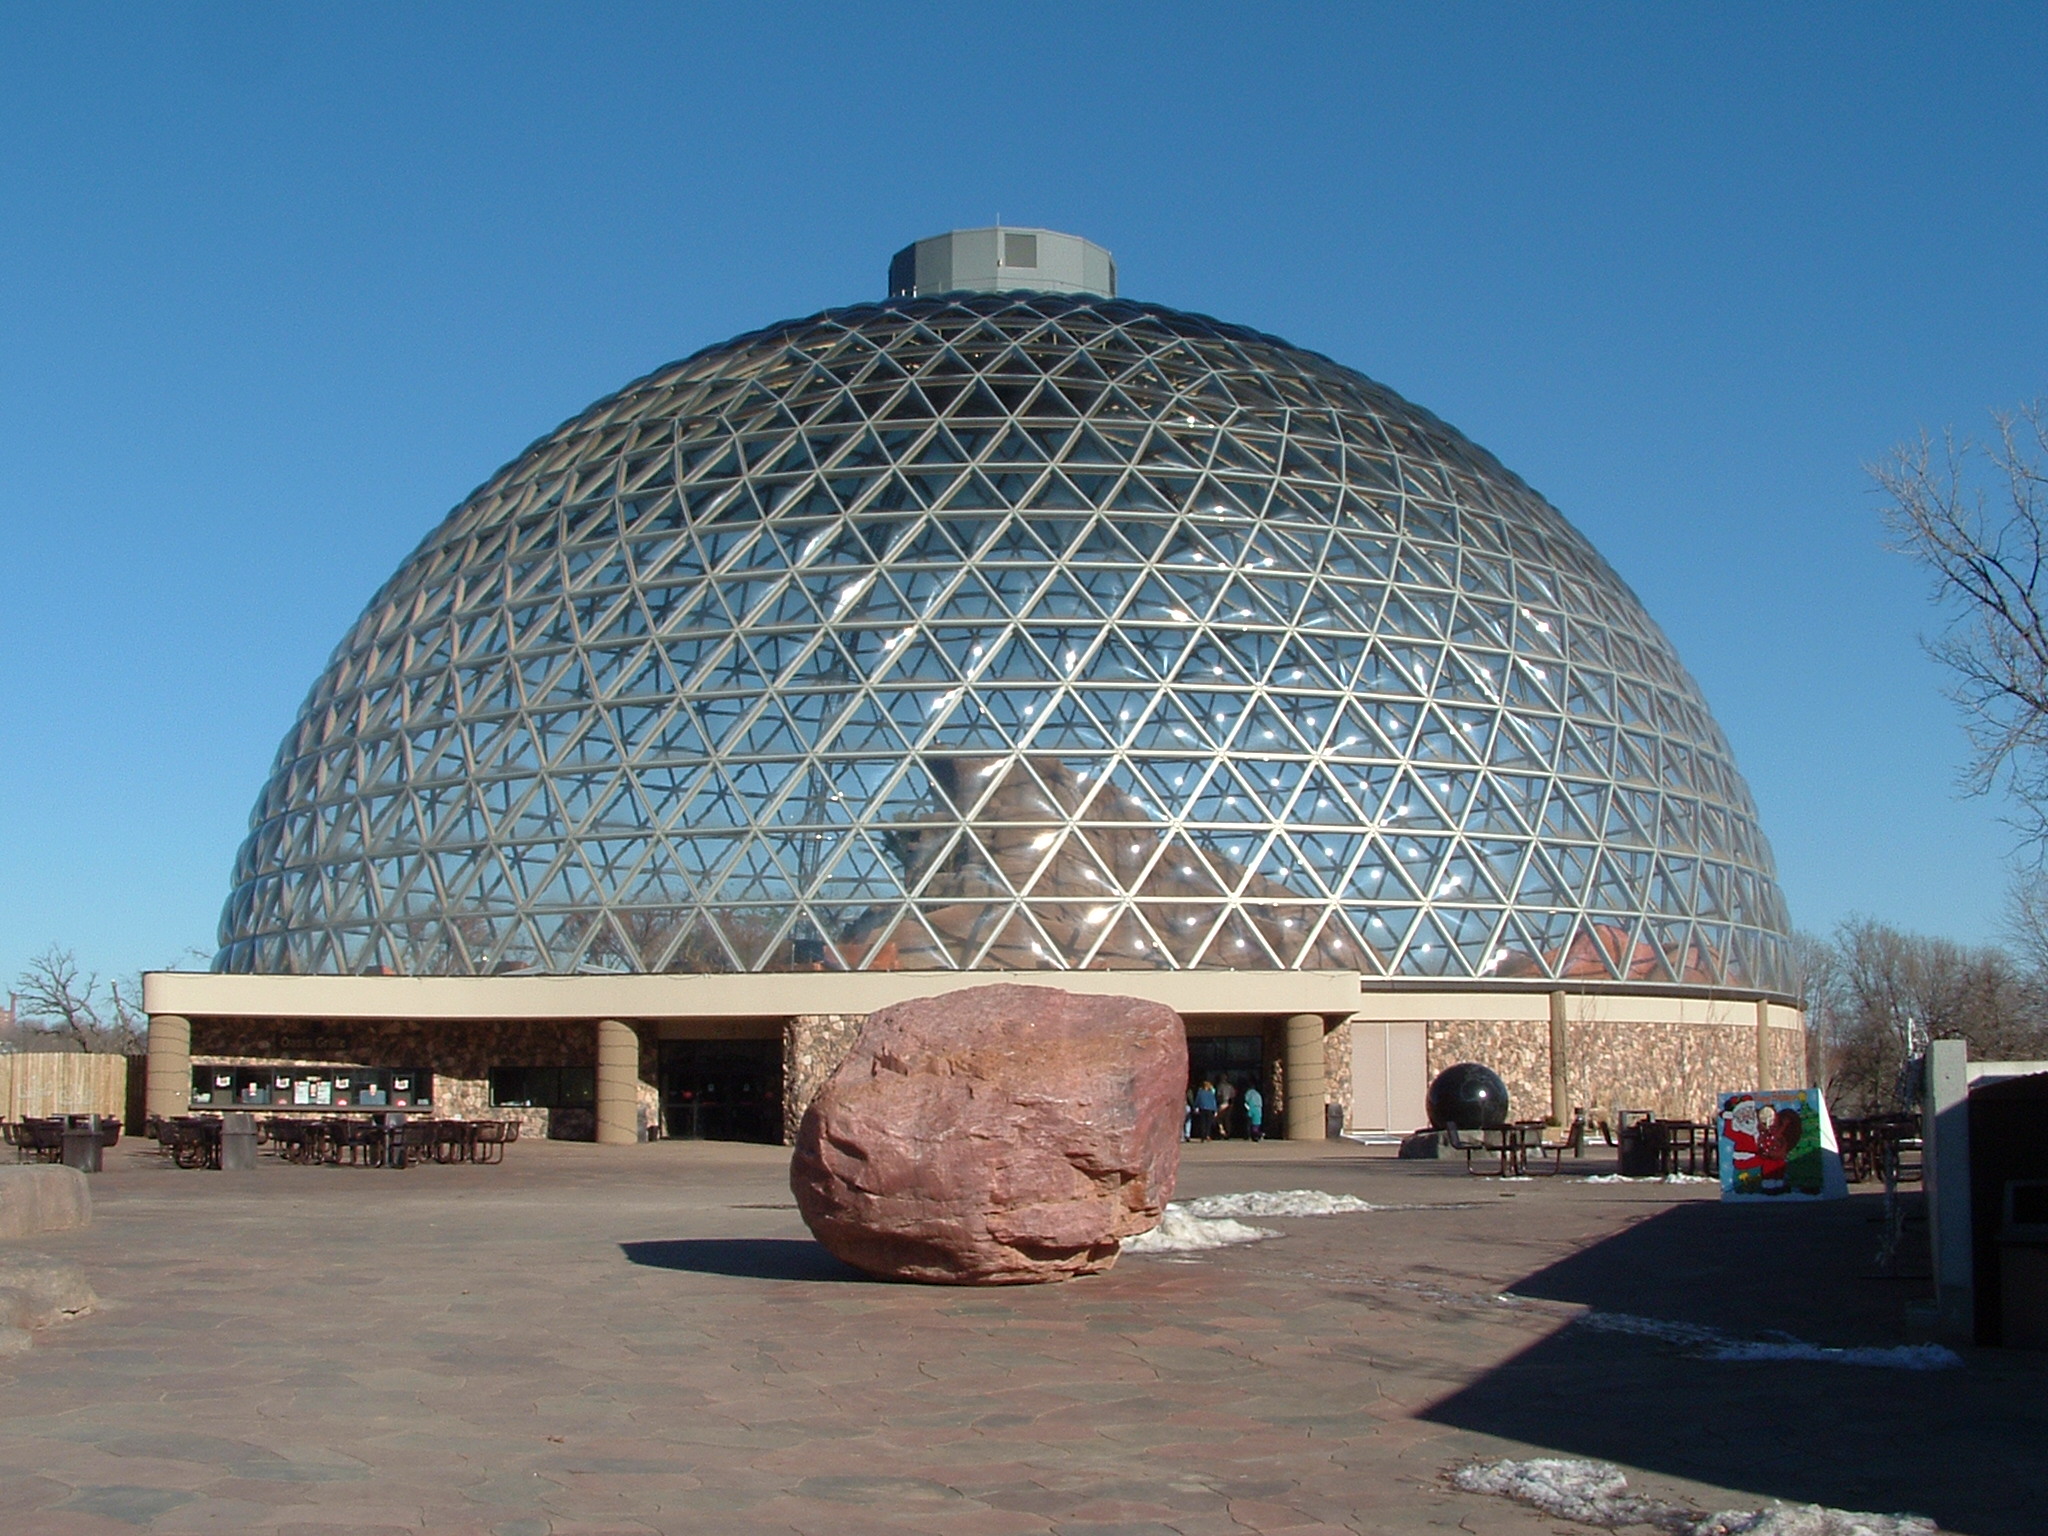 A geodesic dome over a desert landscape.